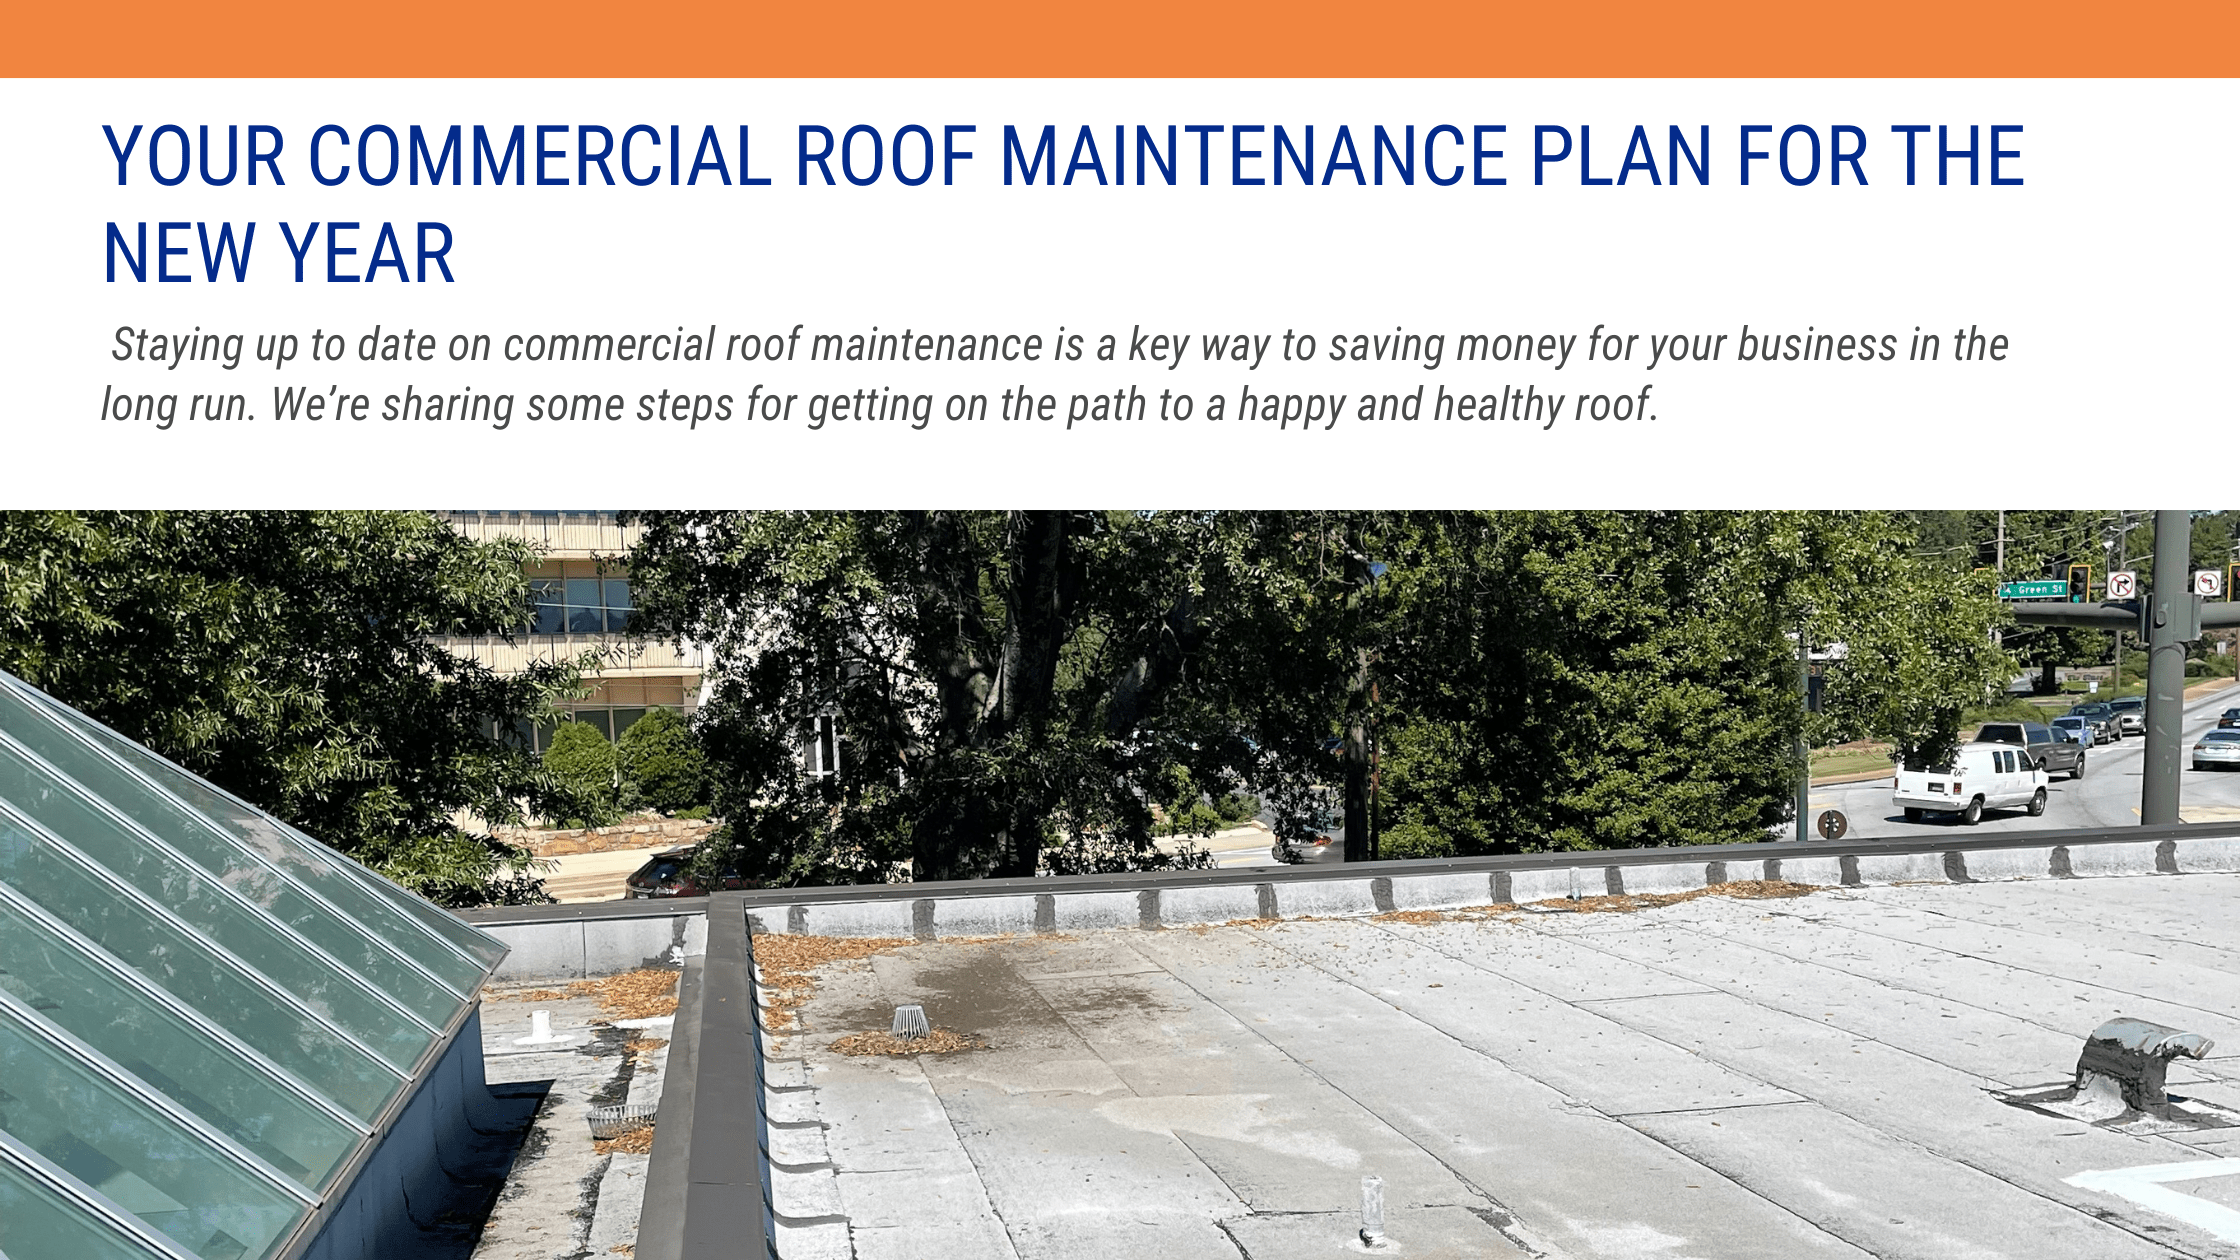 Commercial roof maintenance plan